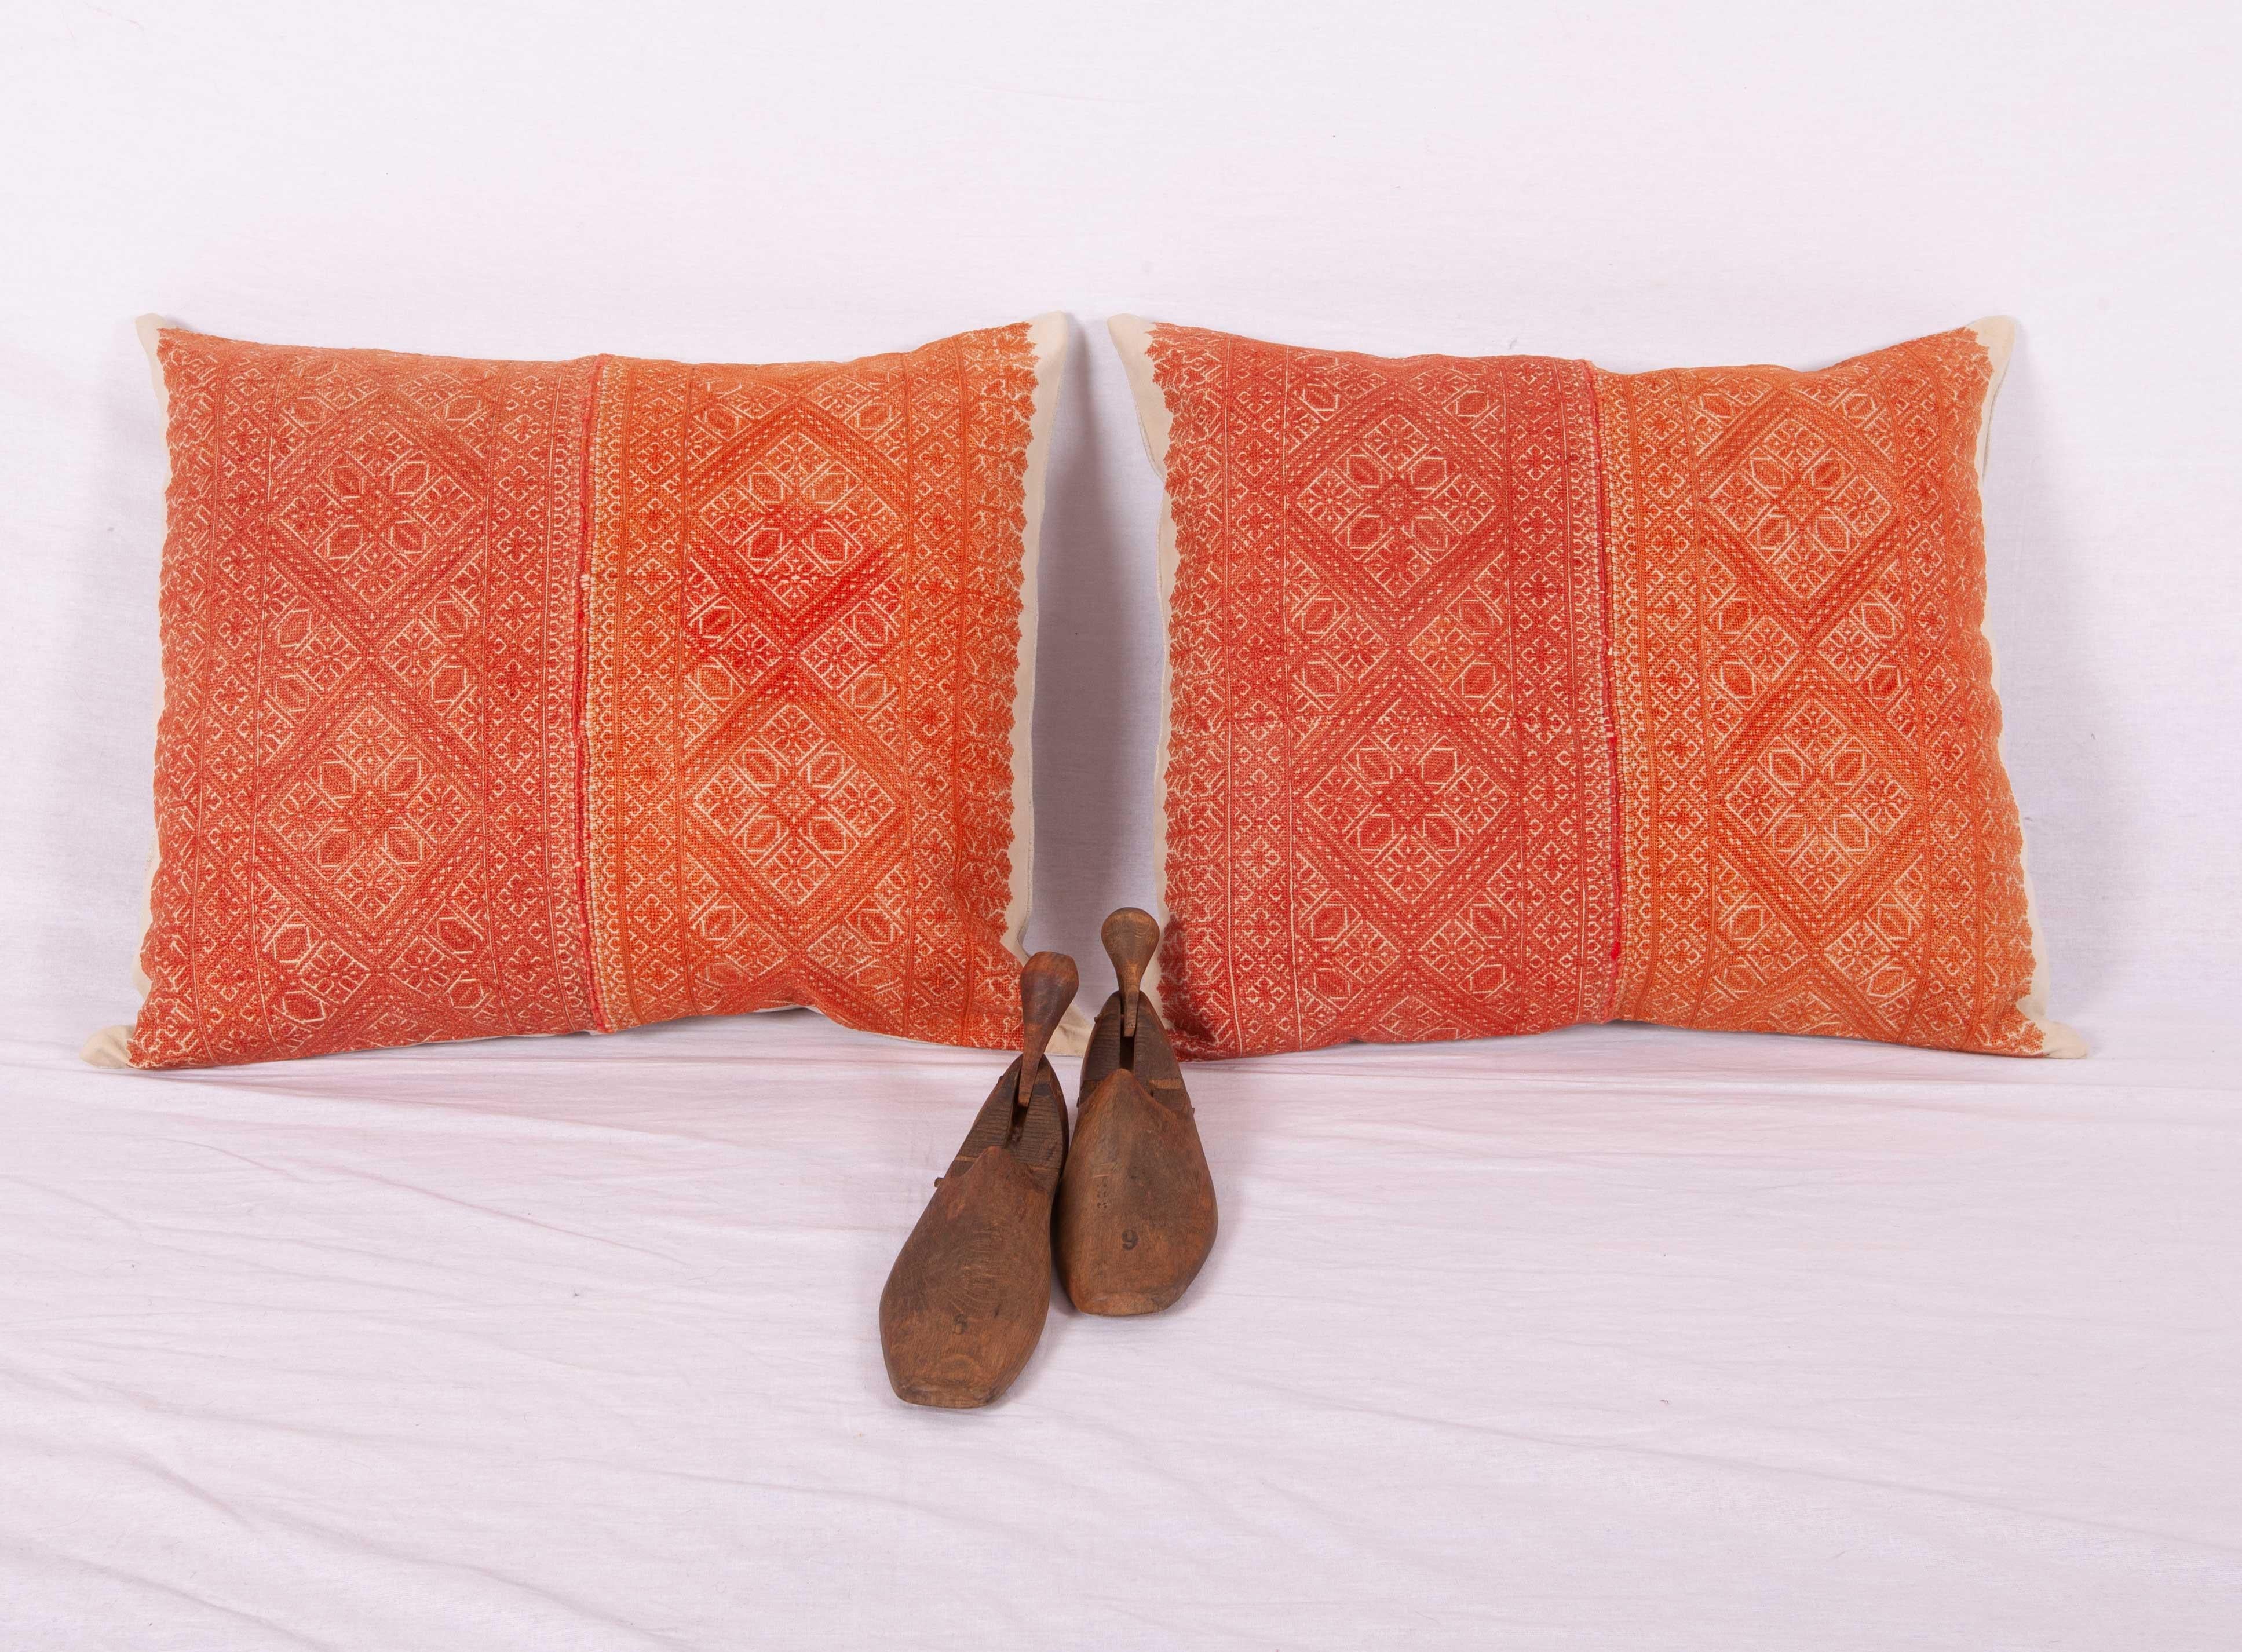 Tribal Pillow Cases Made from an Early 20th Century Fez Embroidery from Morocco